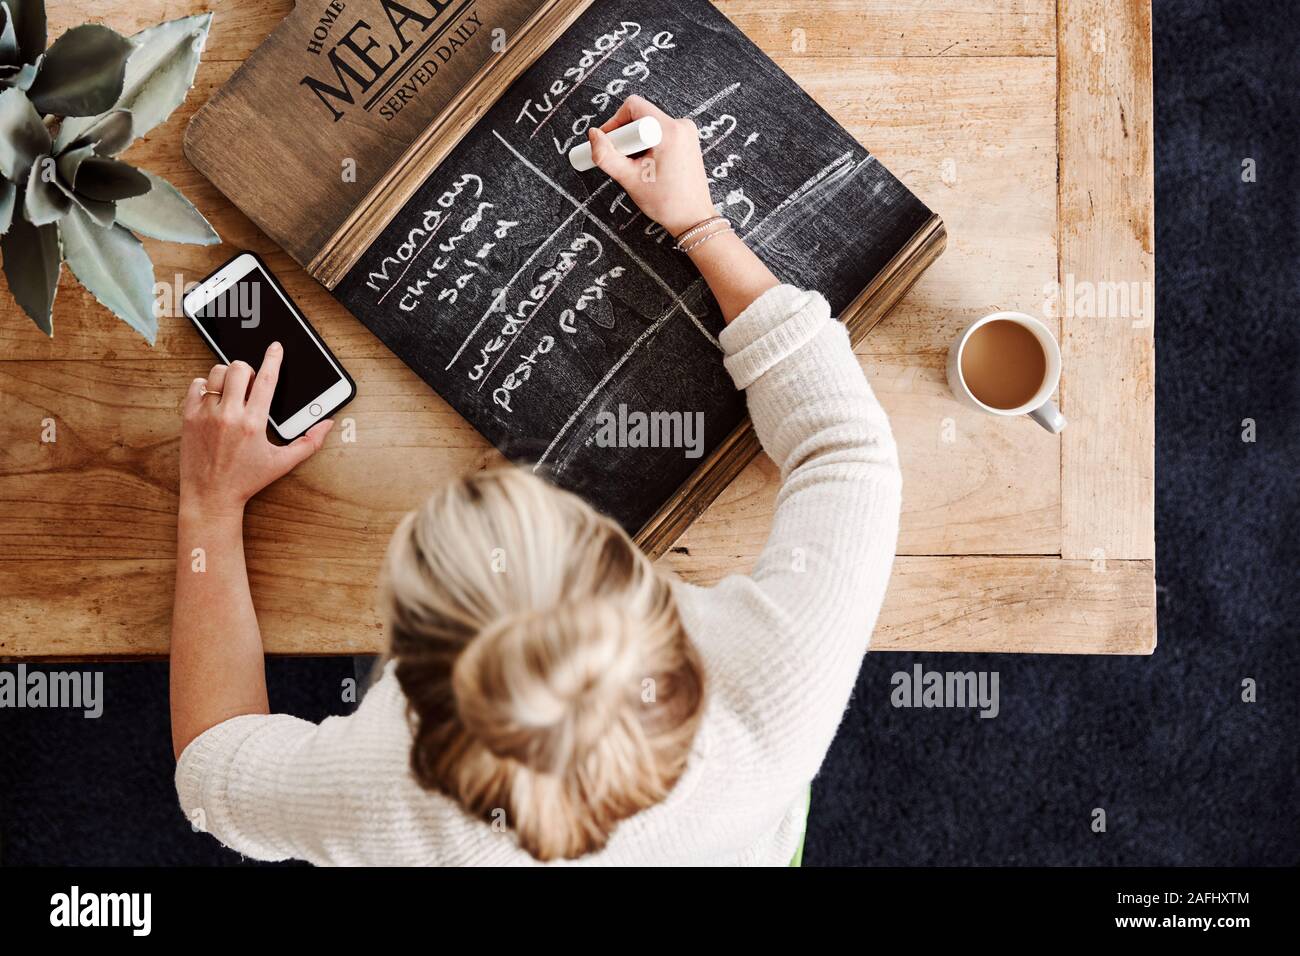 Overhead Shot Looking Down On Woman At Home Writing Meal Plan On Blackborad Stock Photo